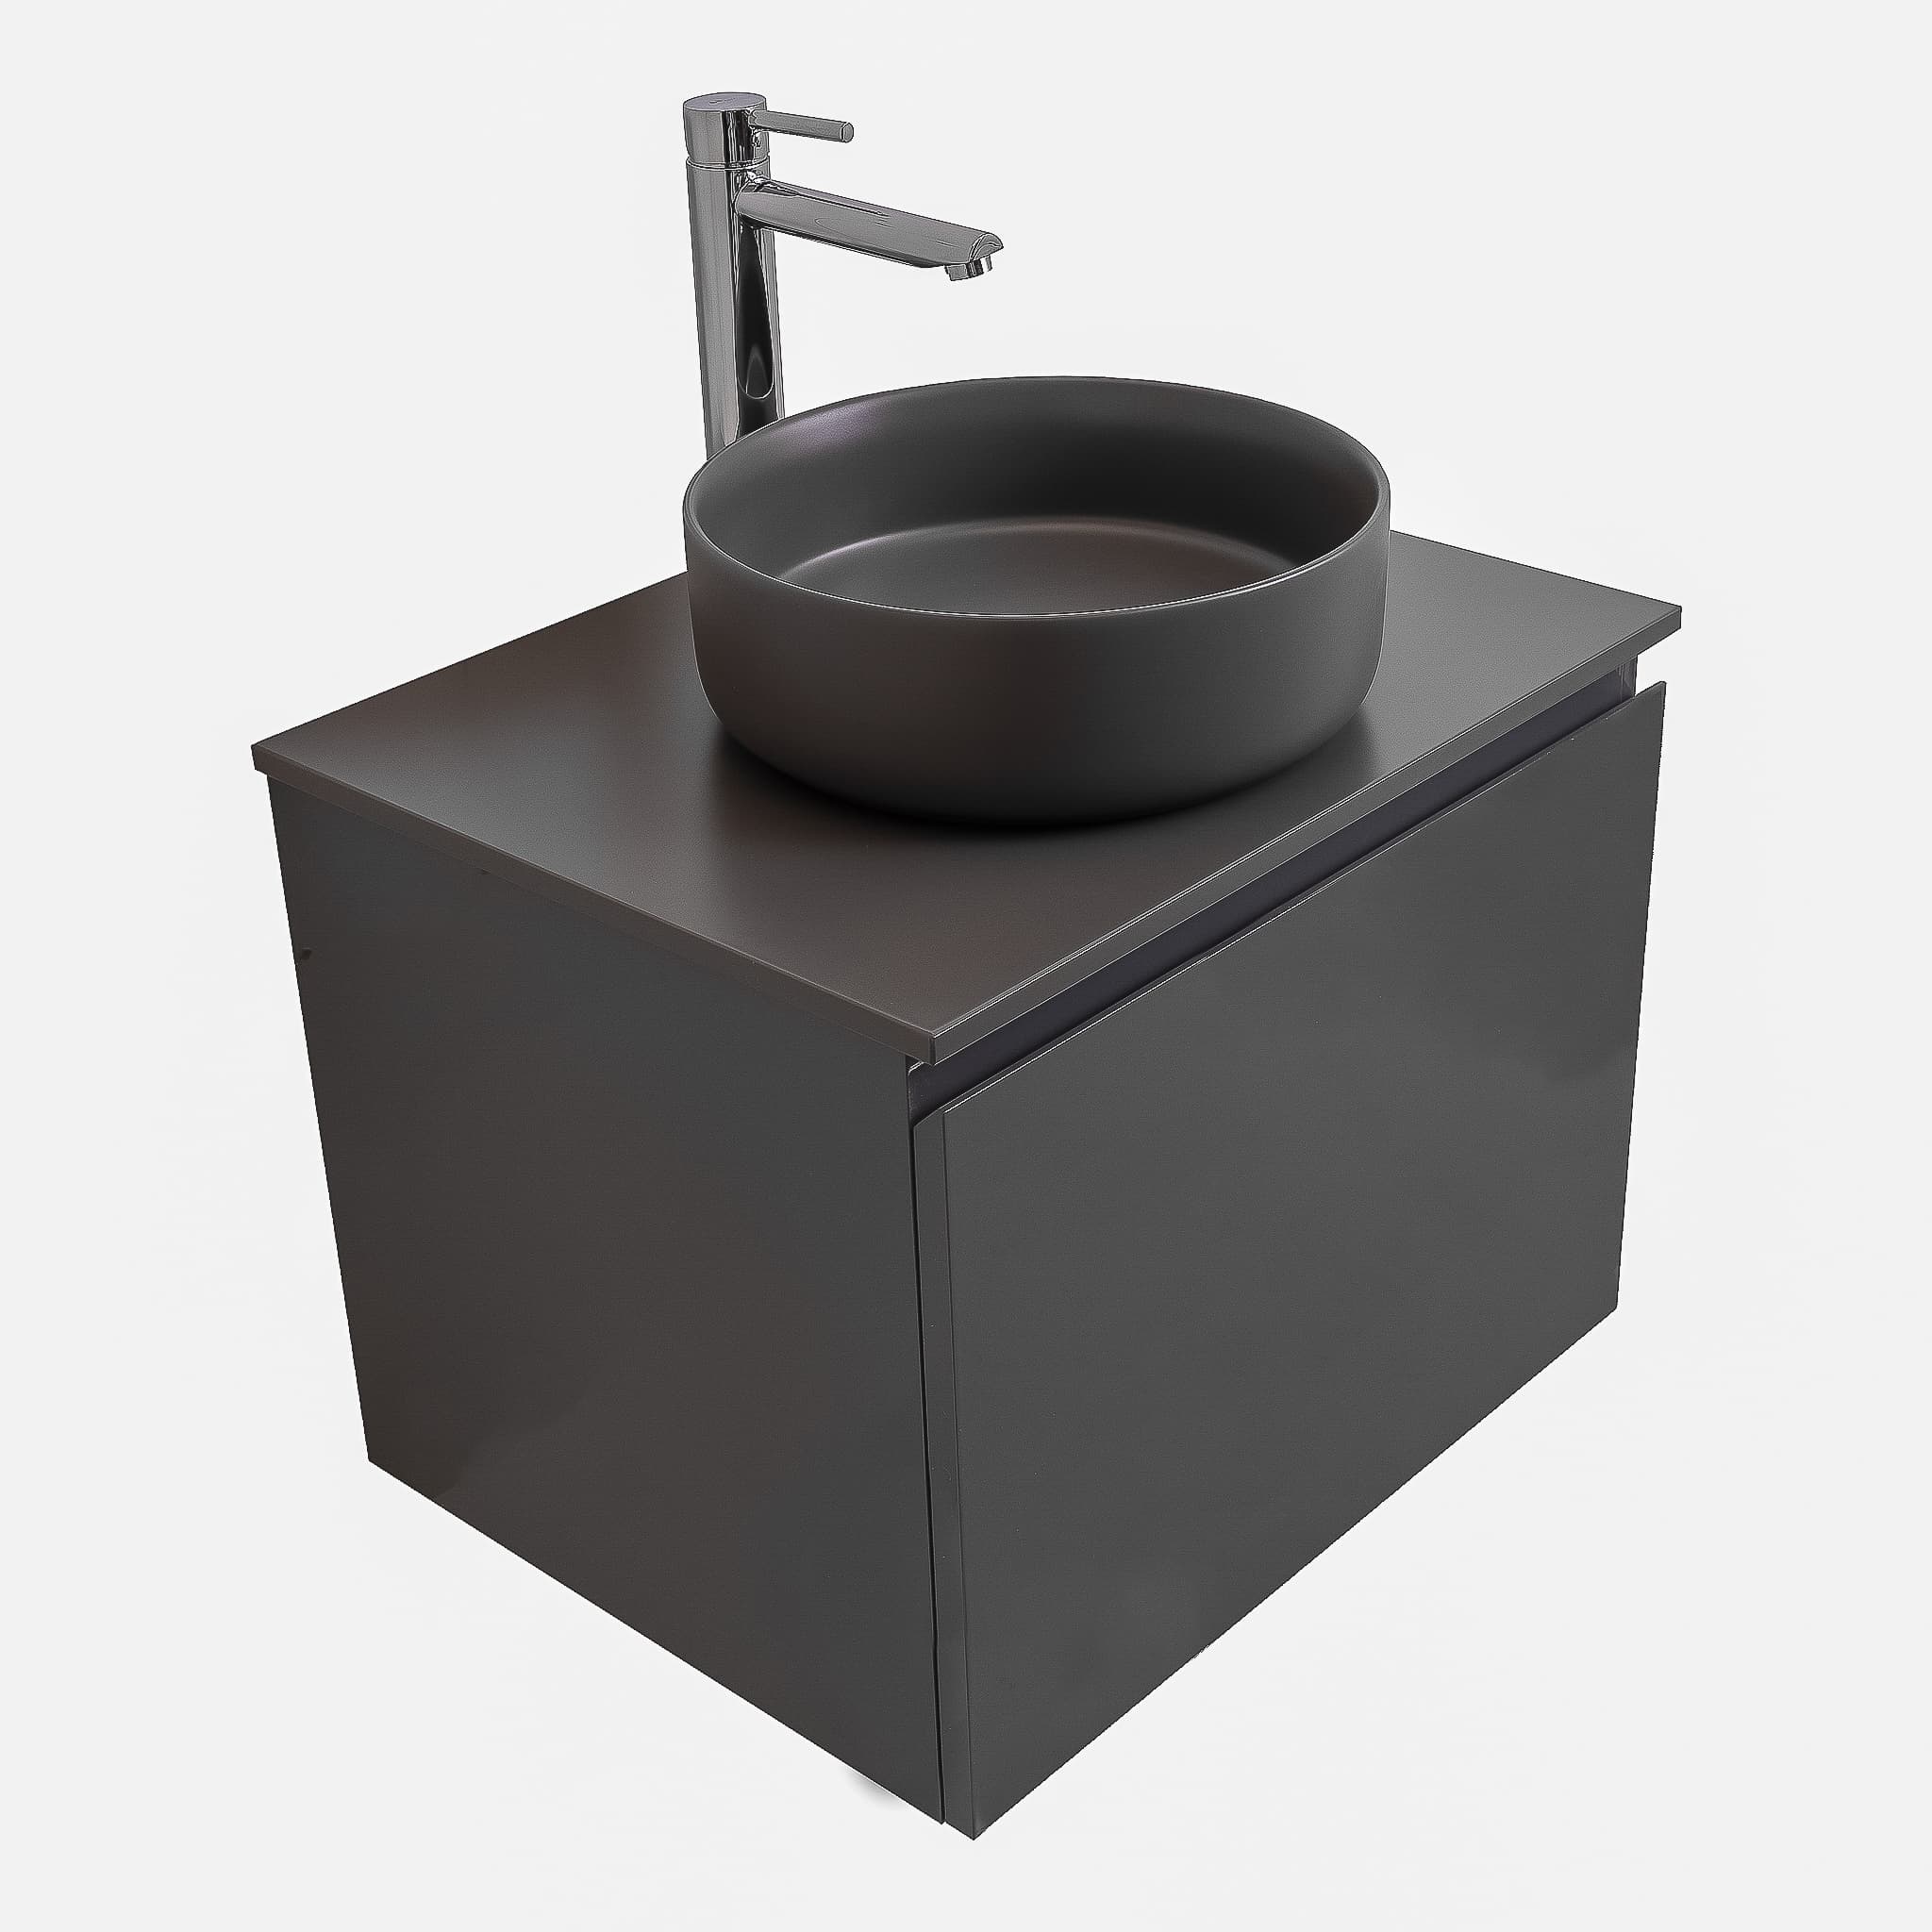 Venice 23.5 Anthracite High Gloss Cabinet, Ares Grey Ceniza Top And Ares Grey Ceniza Ceramic Basin, Wall Mounted Modern Vanity Set